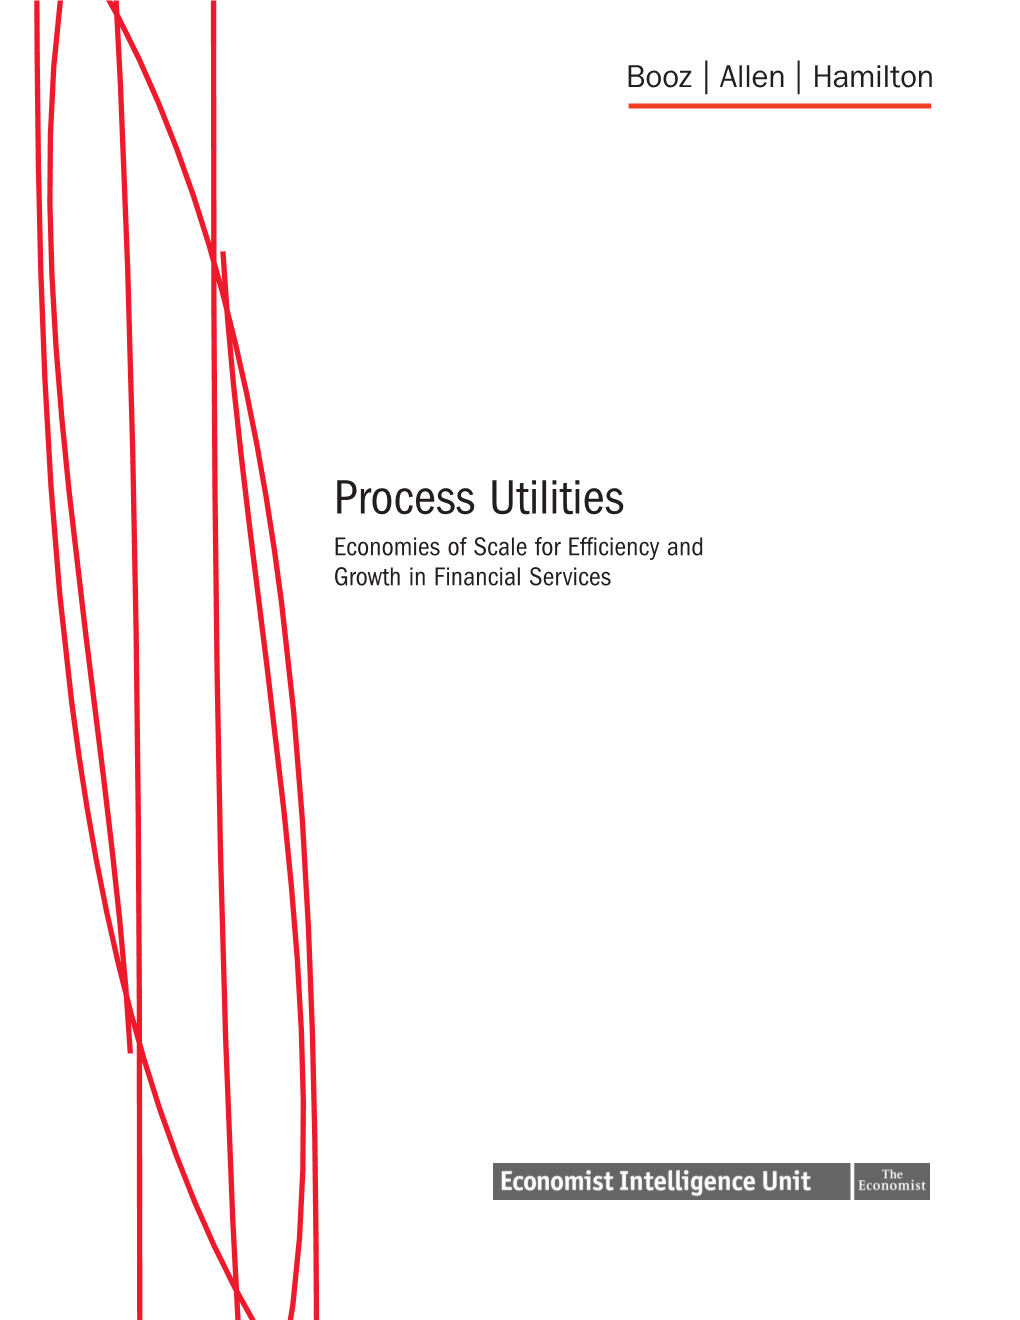 Process Utilities Economies of Scale for Efficiency and Growth in Financial Services TABLE of CONTENTS